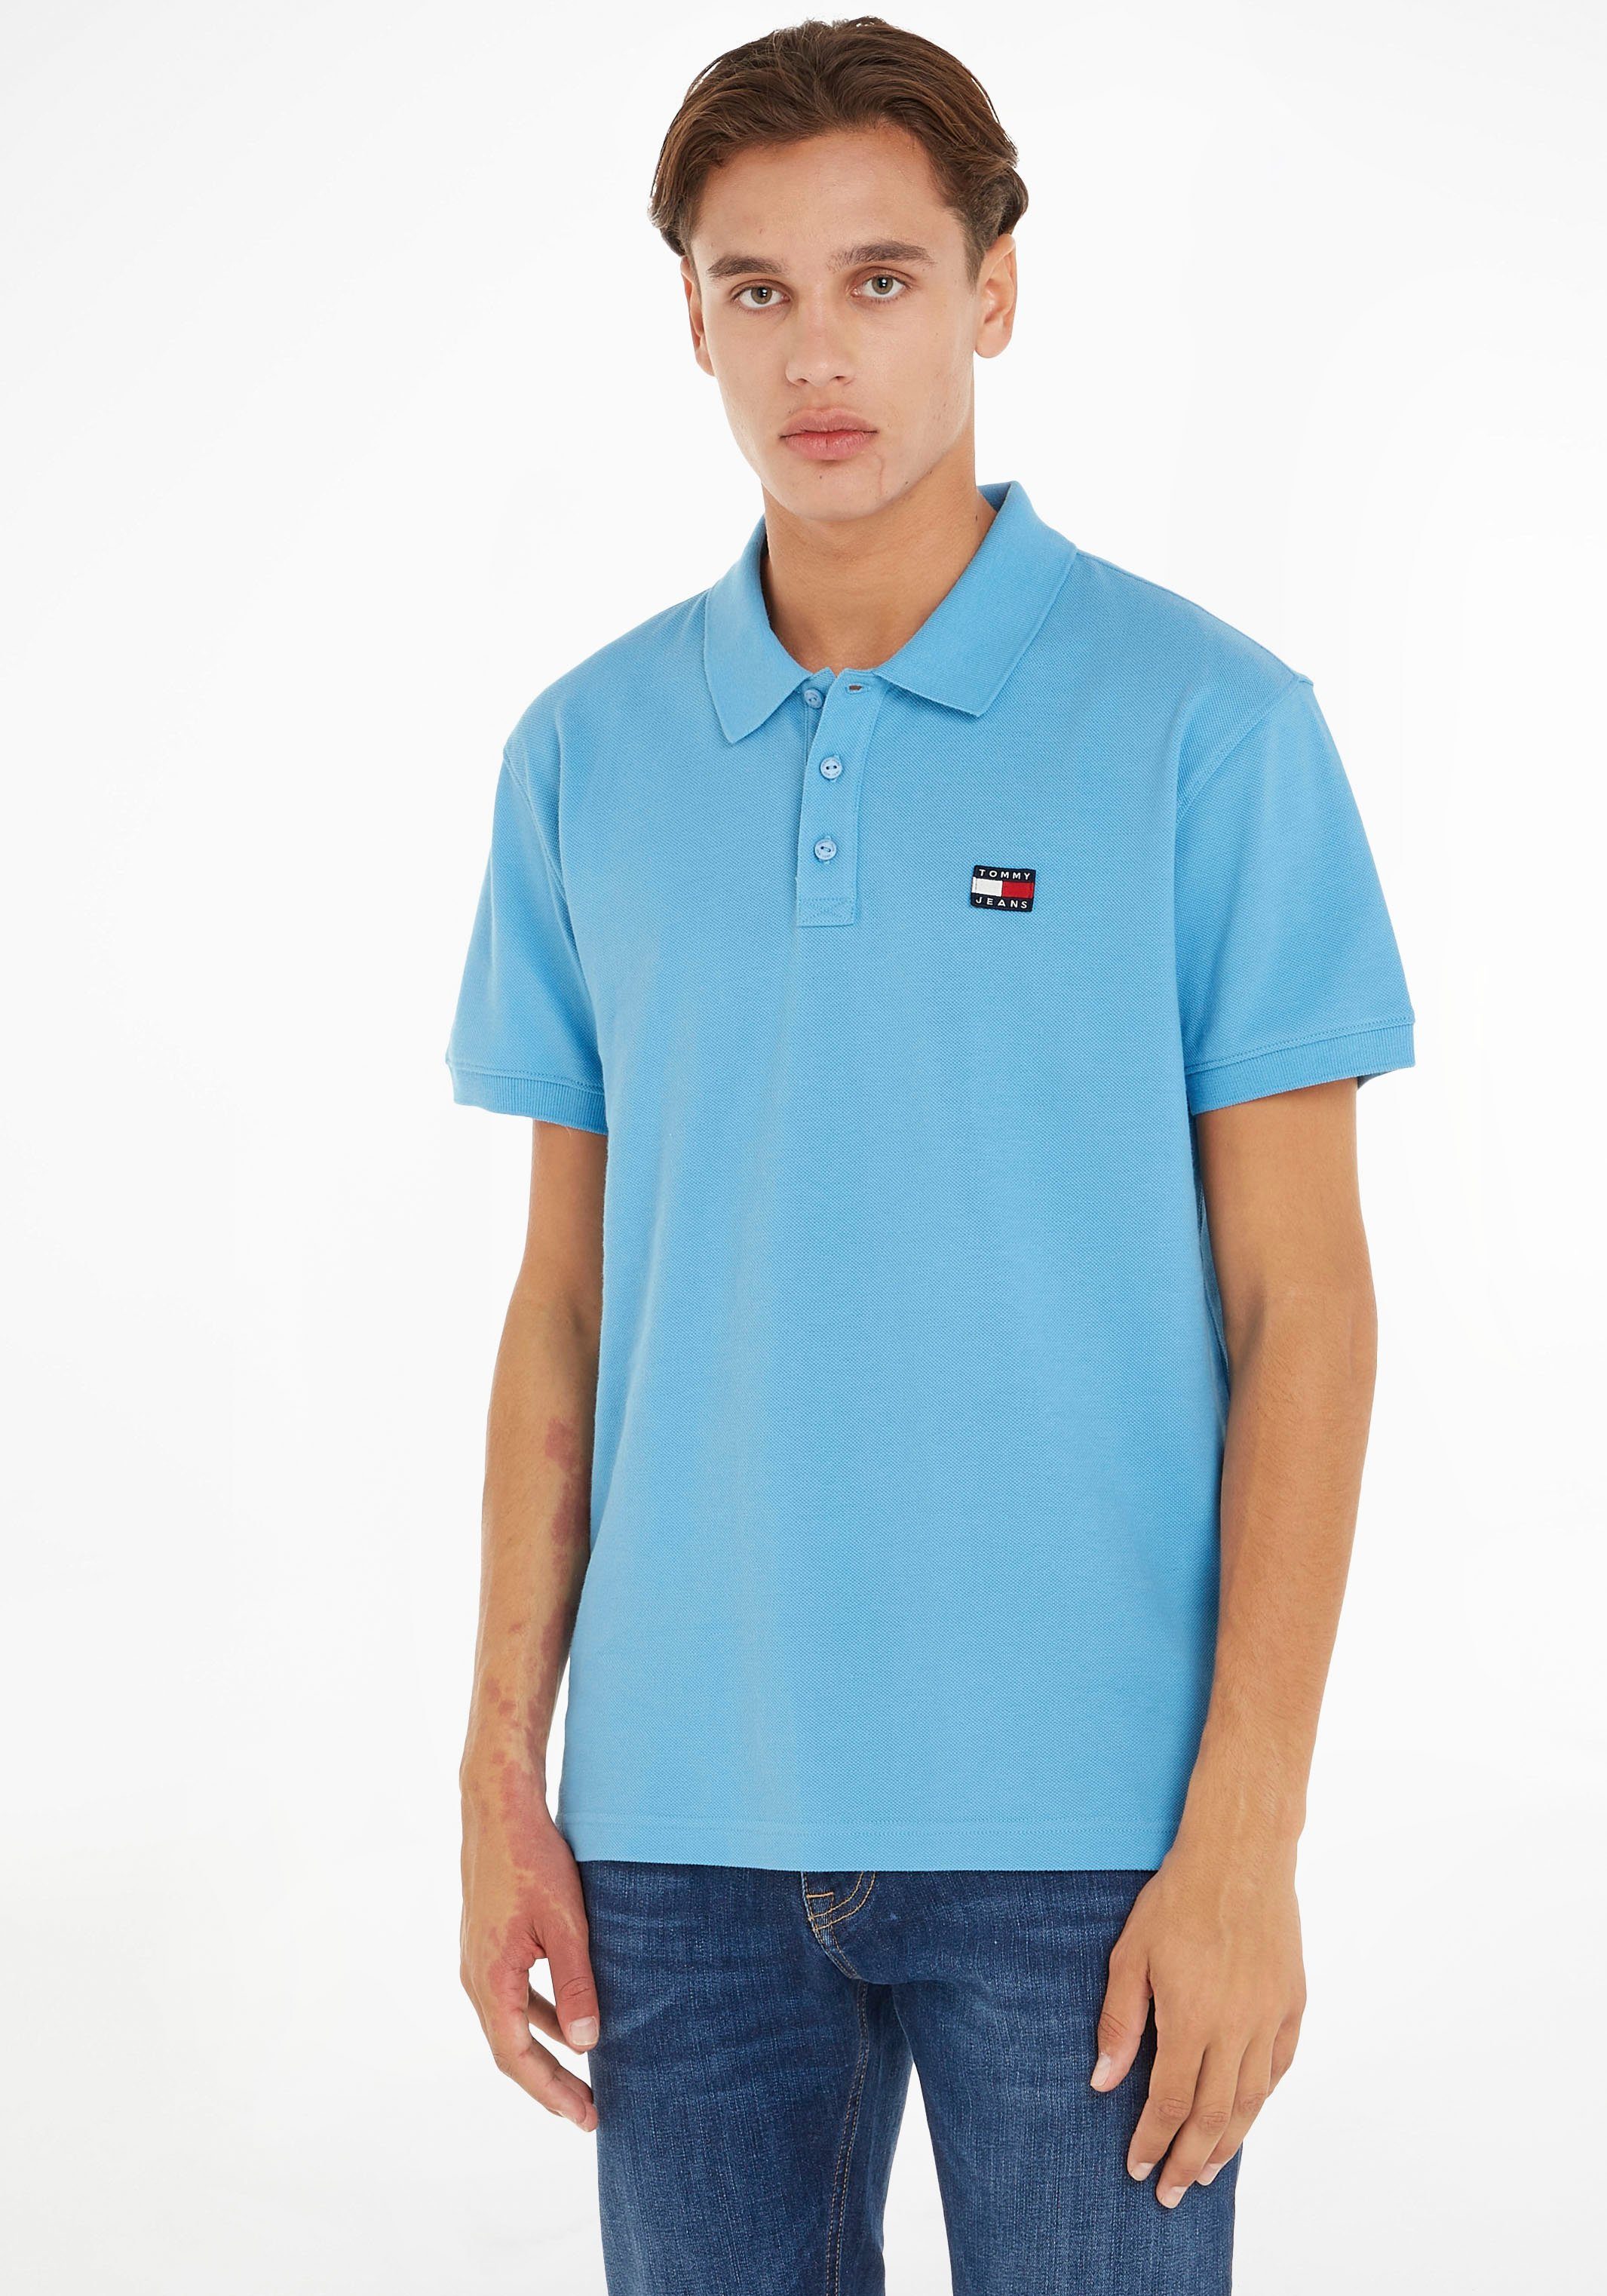 Poloshirt 3-Knopf-Form TJM XS BADGE POLO Skysail Tommy Jeans CLSC mit